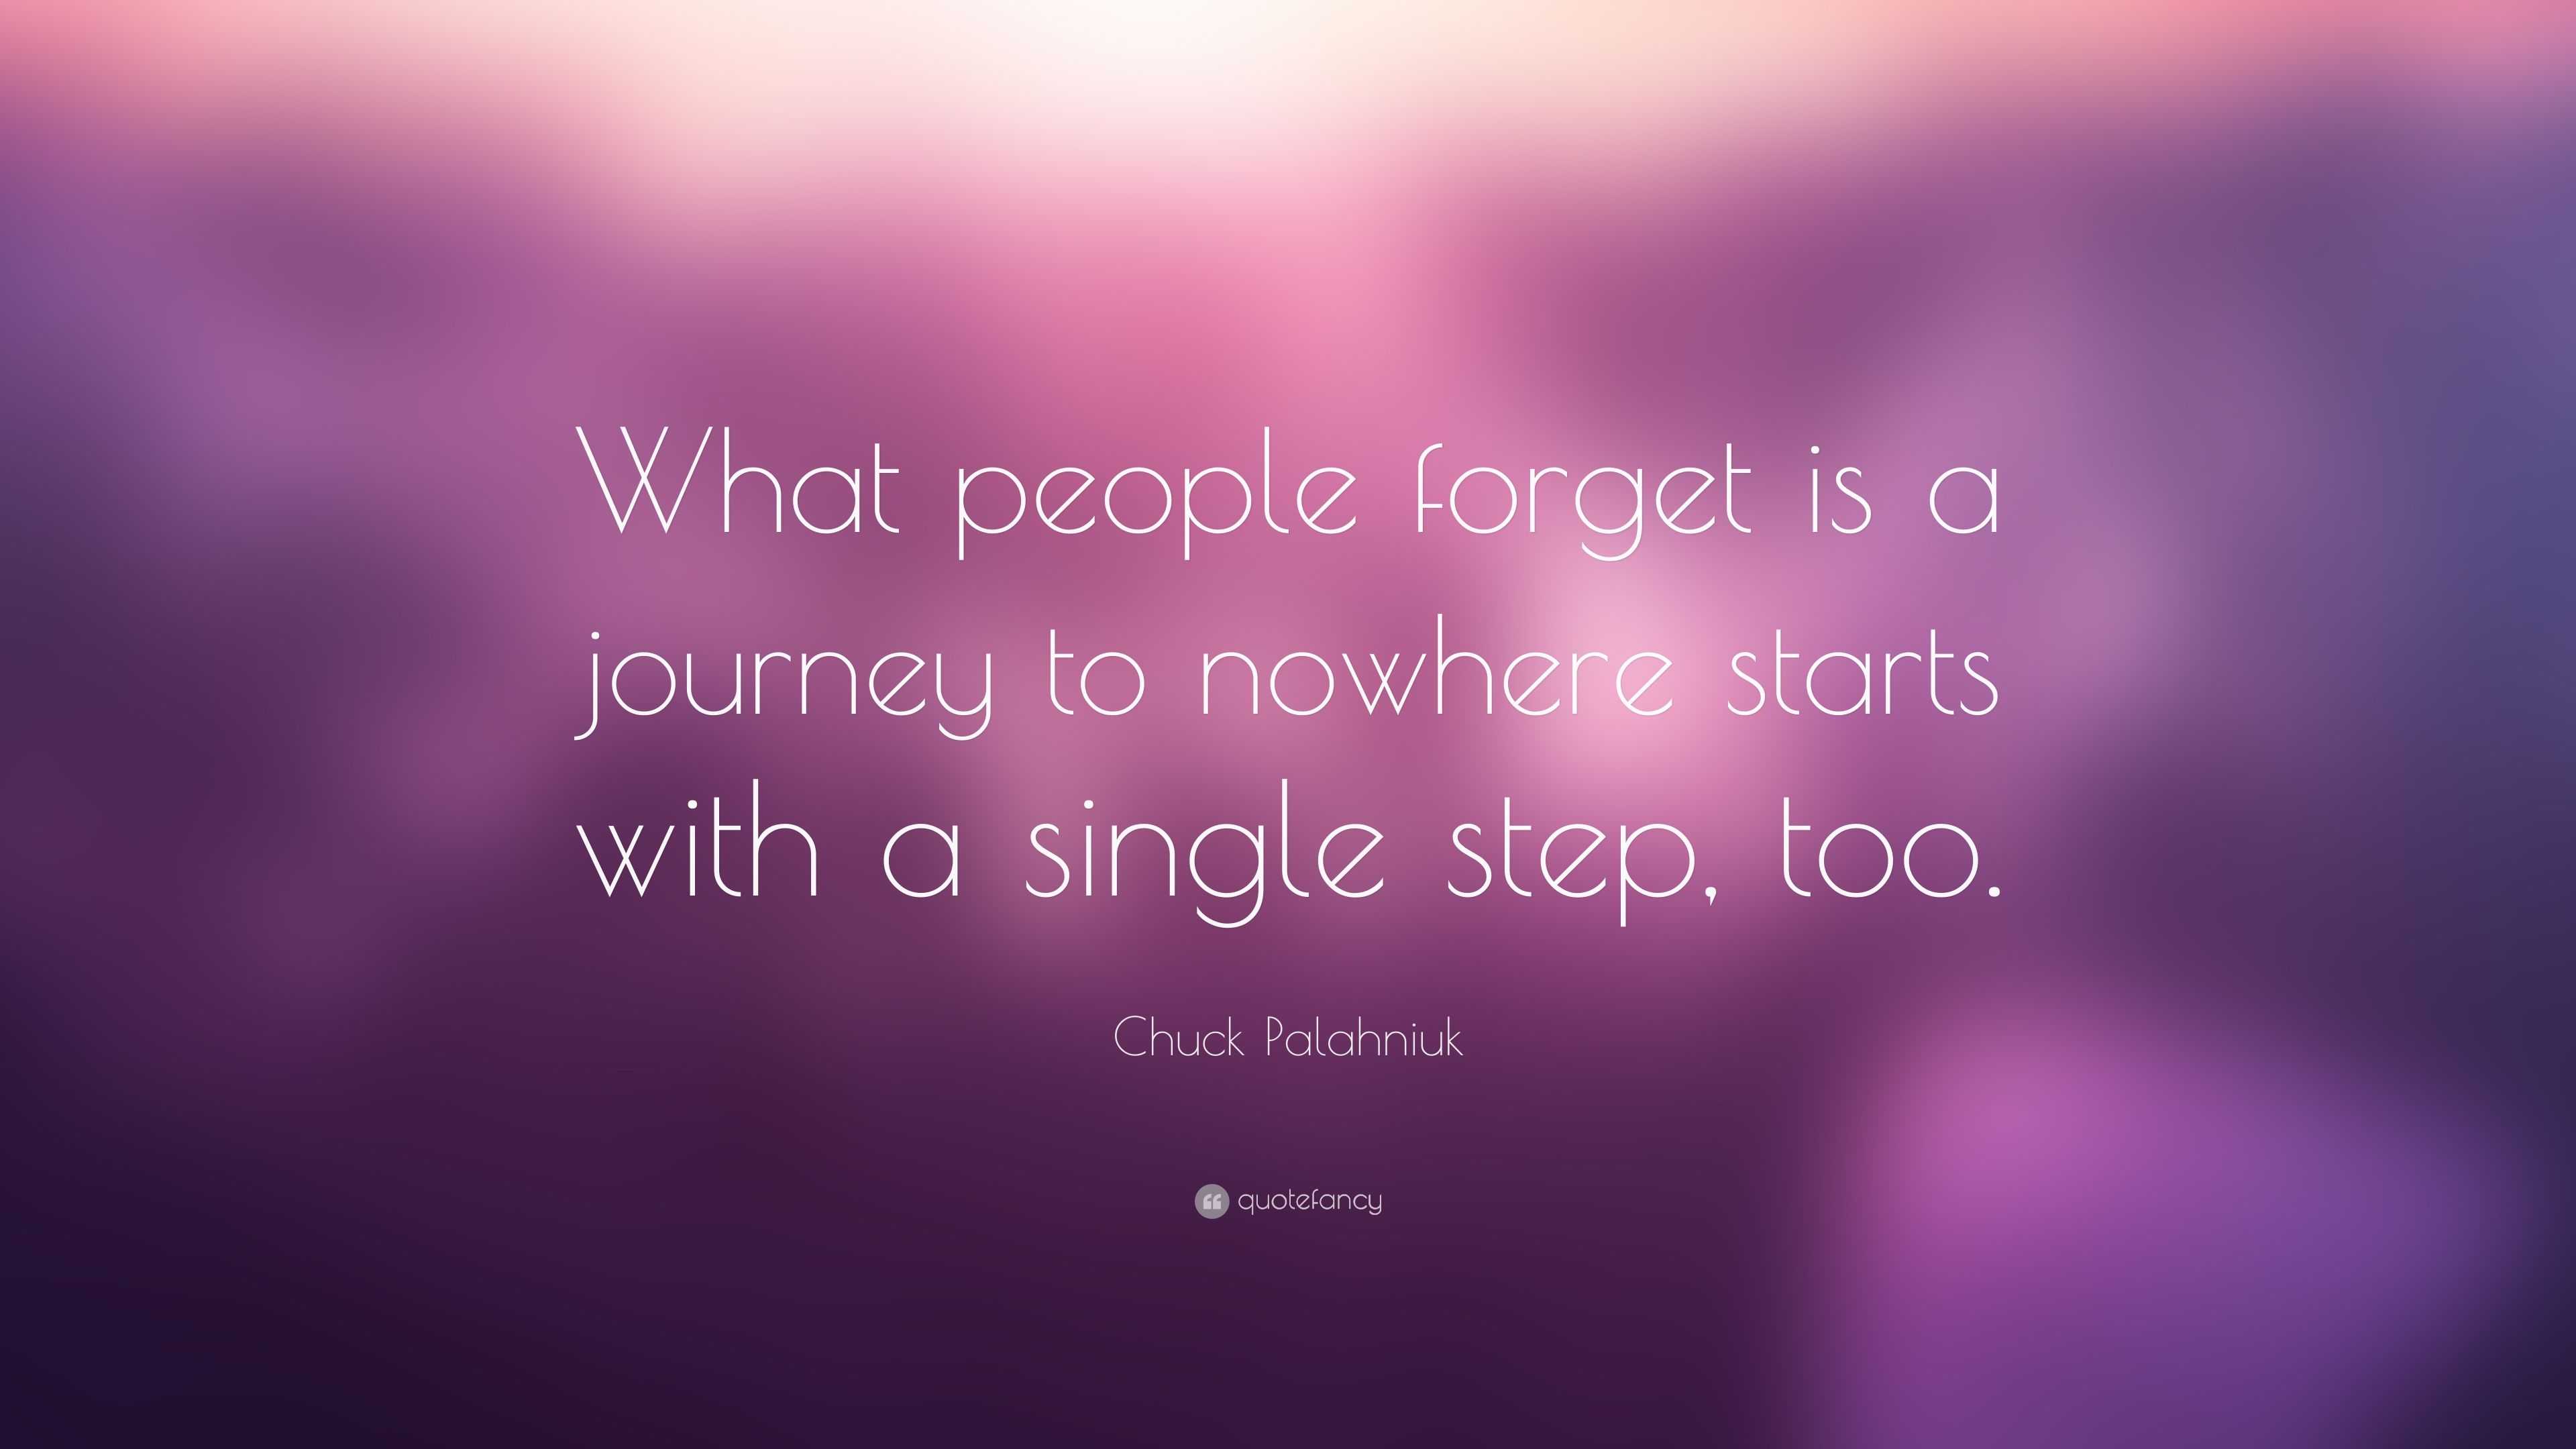 Chuck Palahniuk Quote: “What people forget is a journey to nowhere ...